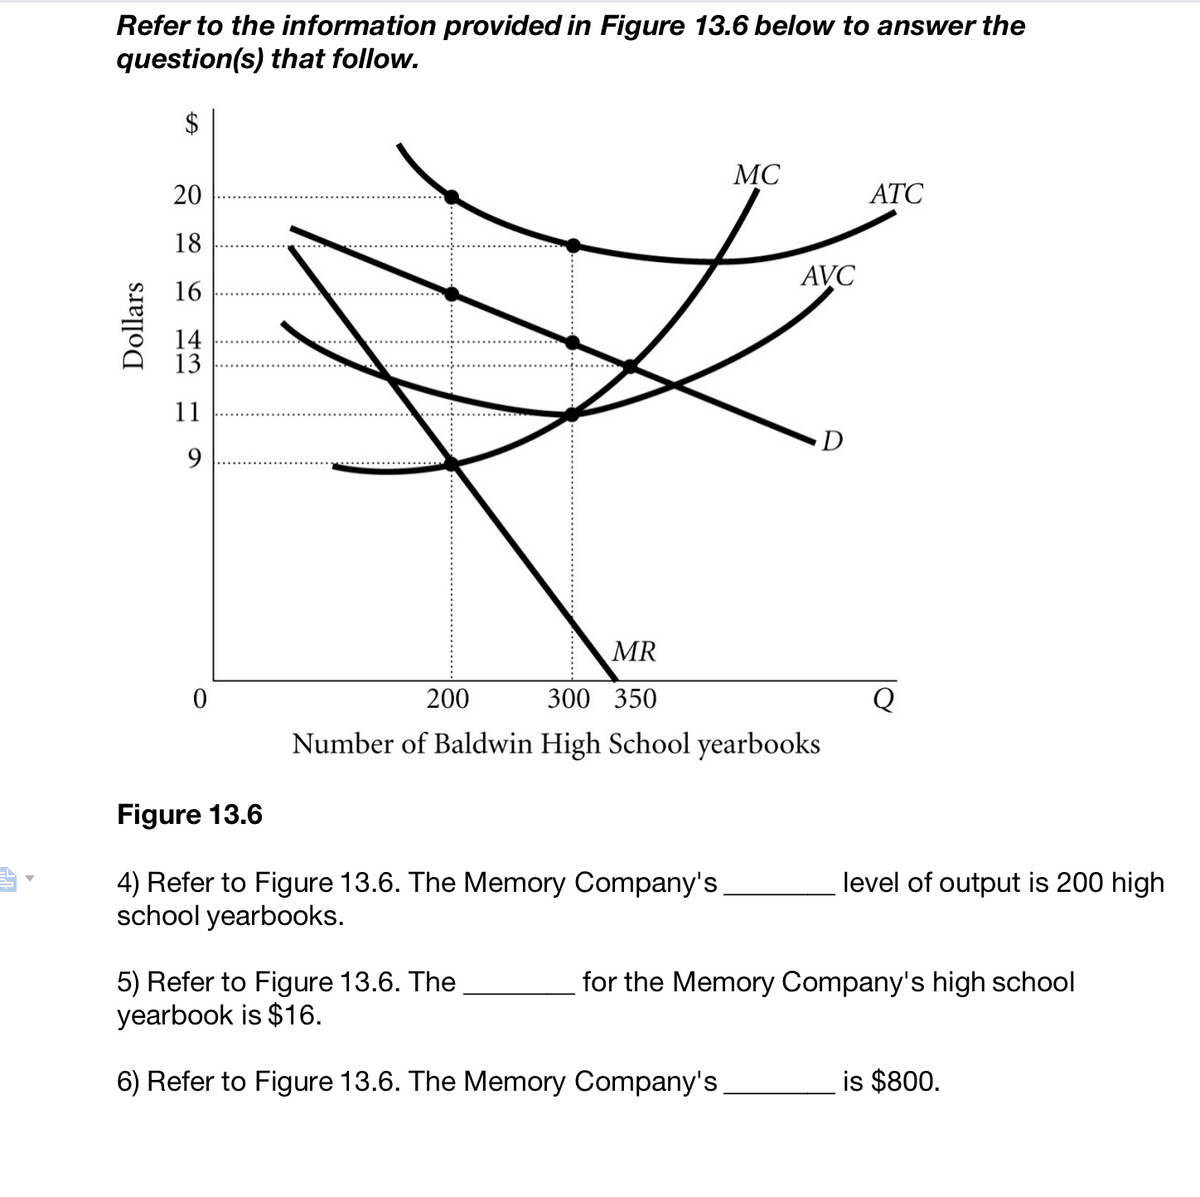 -k
Refer to the information provided in Figure 13.6 below to answer the
question(s) that follow.
$
Dollars
20
18
16
14
13
11
9
0
Figure 13.6
4) Refer to Figure 13.6. The Memory Company's
school yearbooks.
MC
MR
200
300 350
Number of Baldwin High School yearbooks
5) Refer to Figure 13.6. The
yearbook is $16.
6) Refer to Figure 13.6. The Memory Company's
AVC
D
ATC
Q
level of output is 200 high
for the Memory Company's high school
is $800.